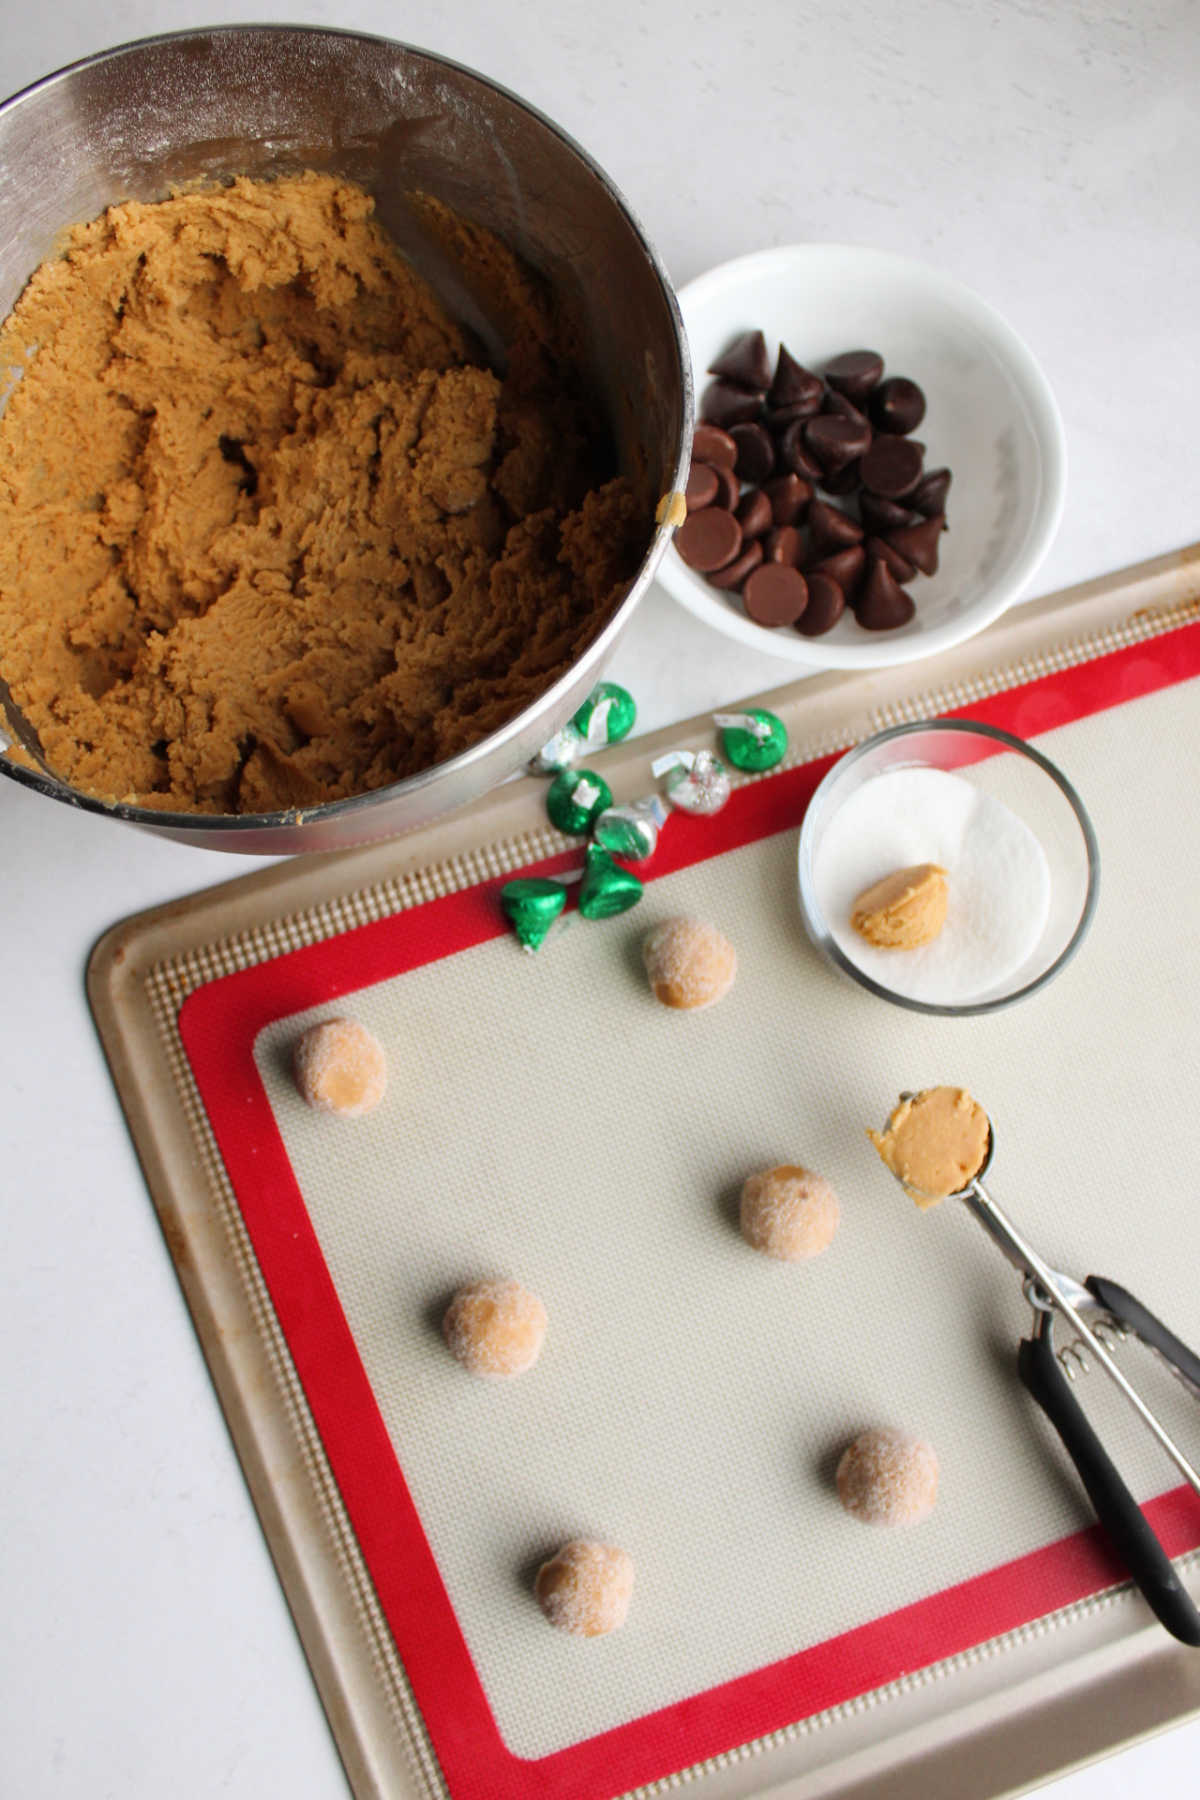 Mixer bowl of peanut butter cookie dough being rolled into balls to become blossom cookies.